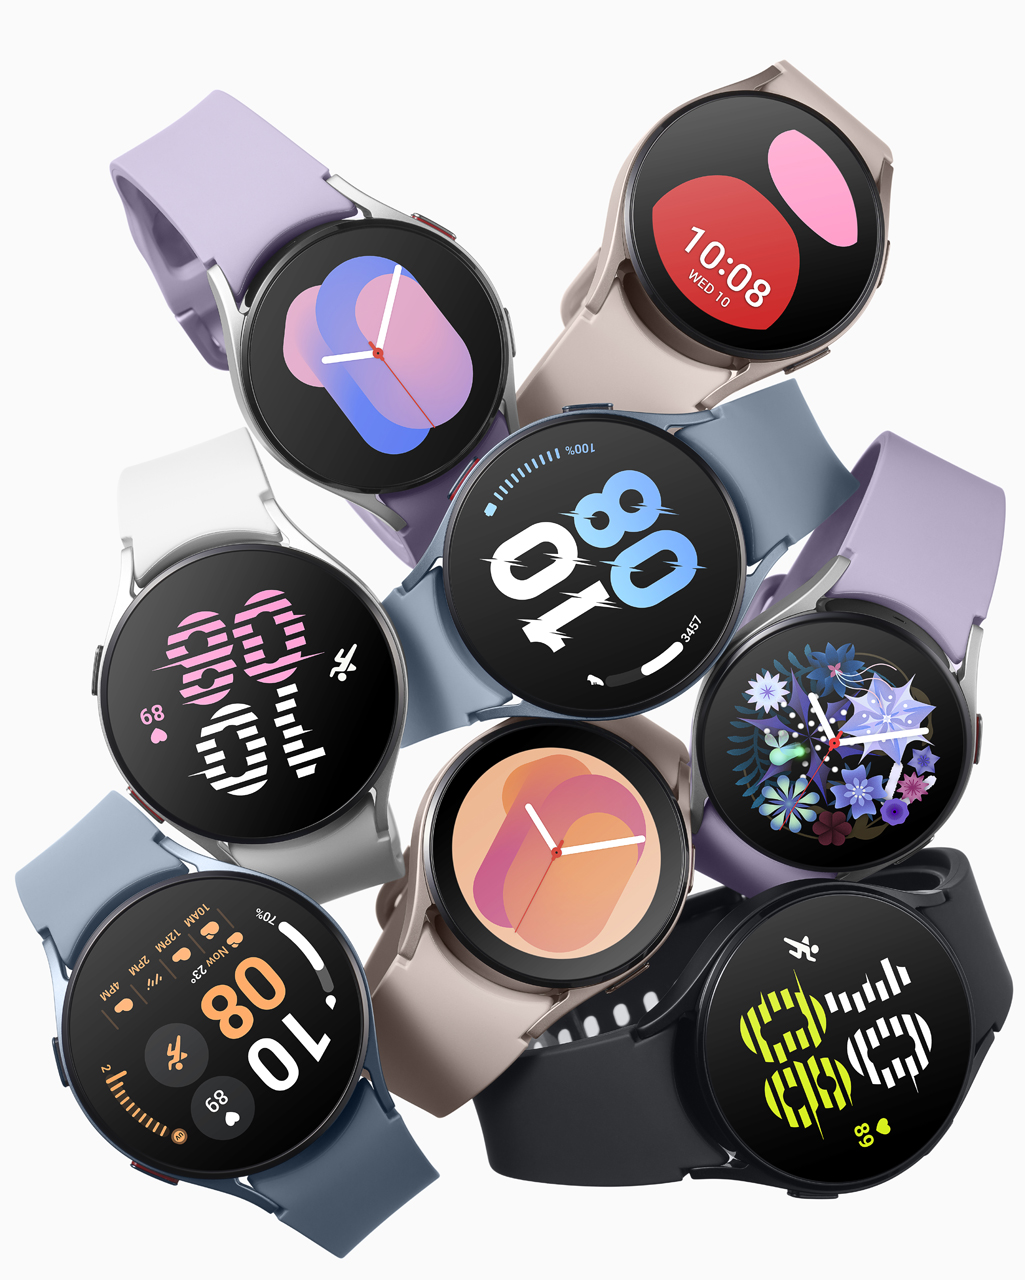 BP and ECG monitoring features now available in the PH with the latest update of the Galaxy Watch5 Series